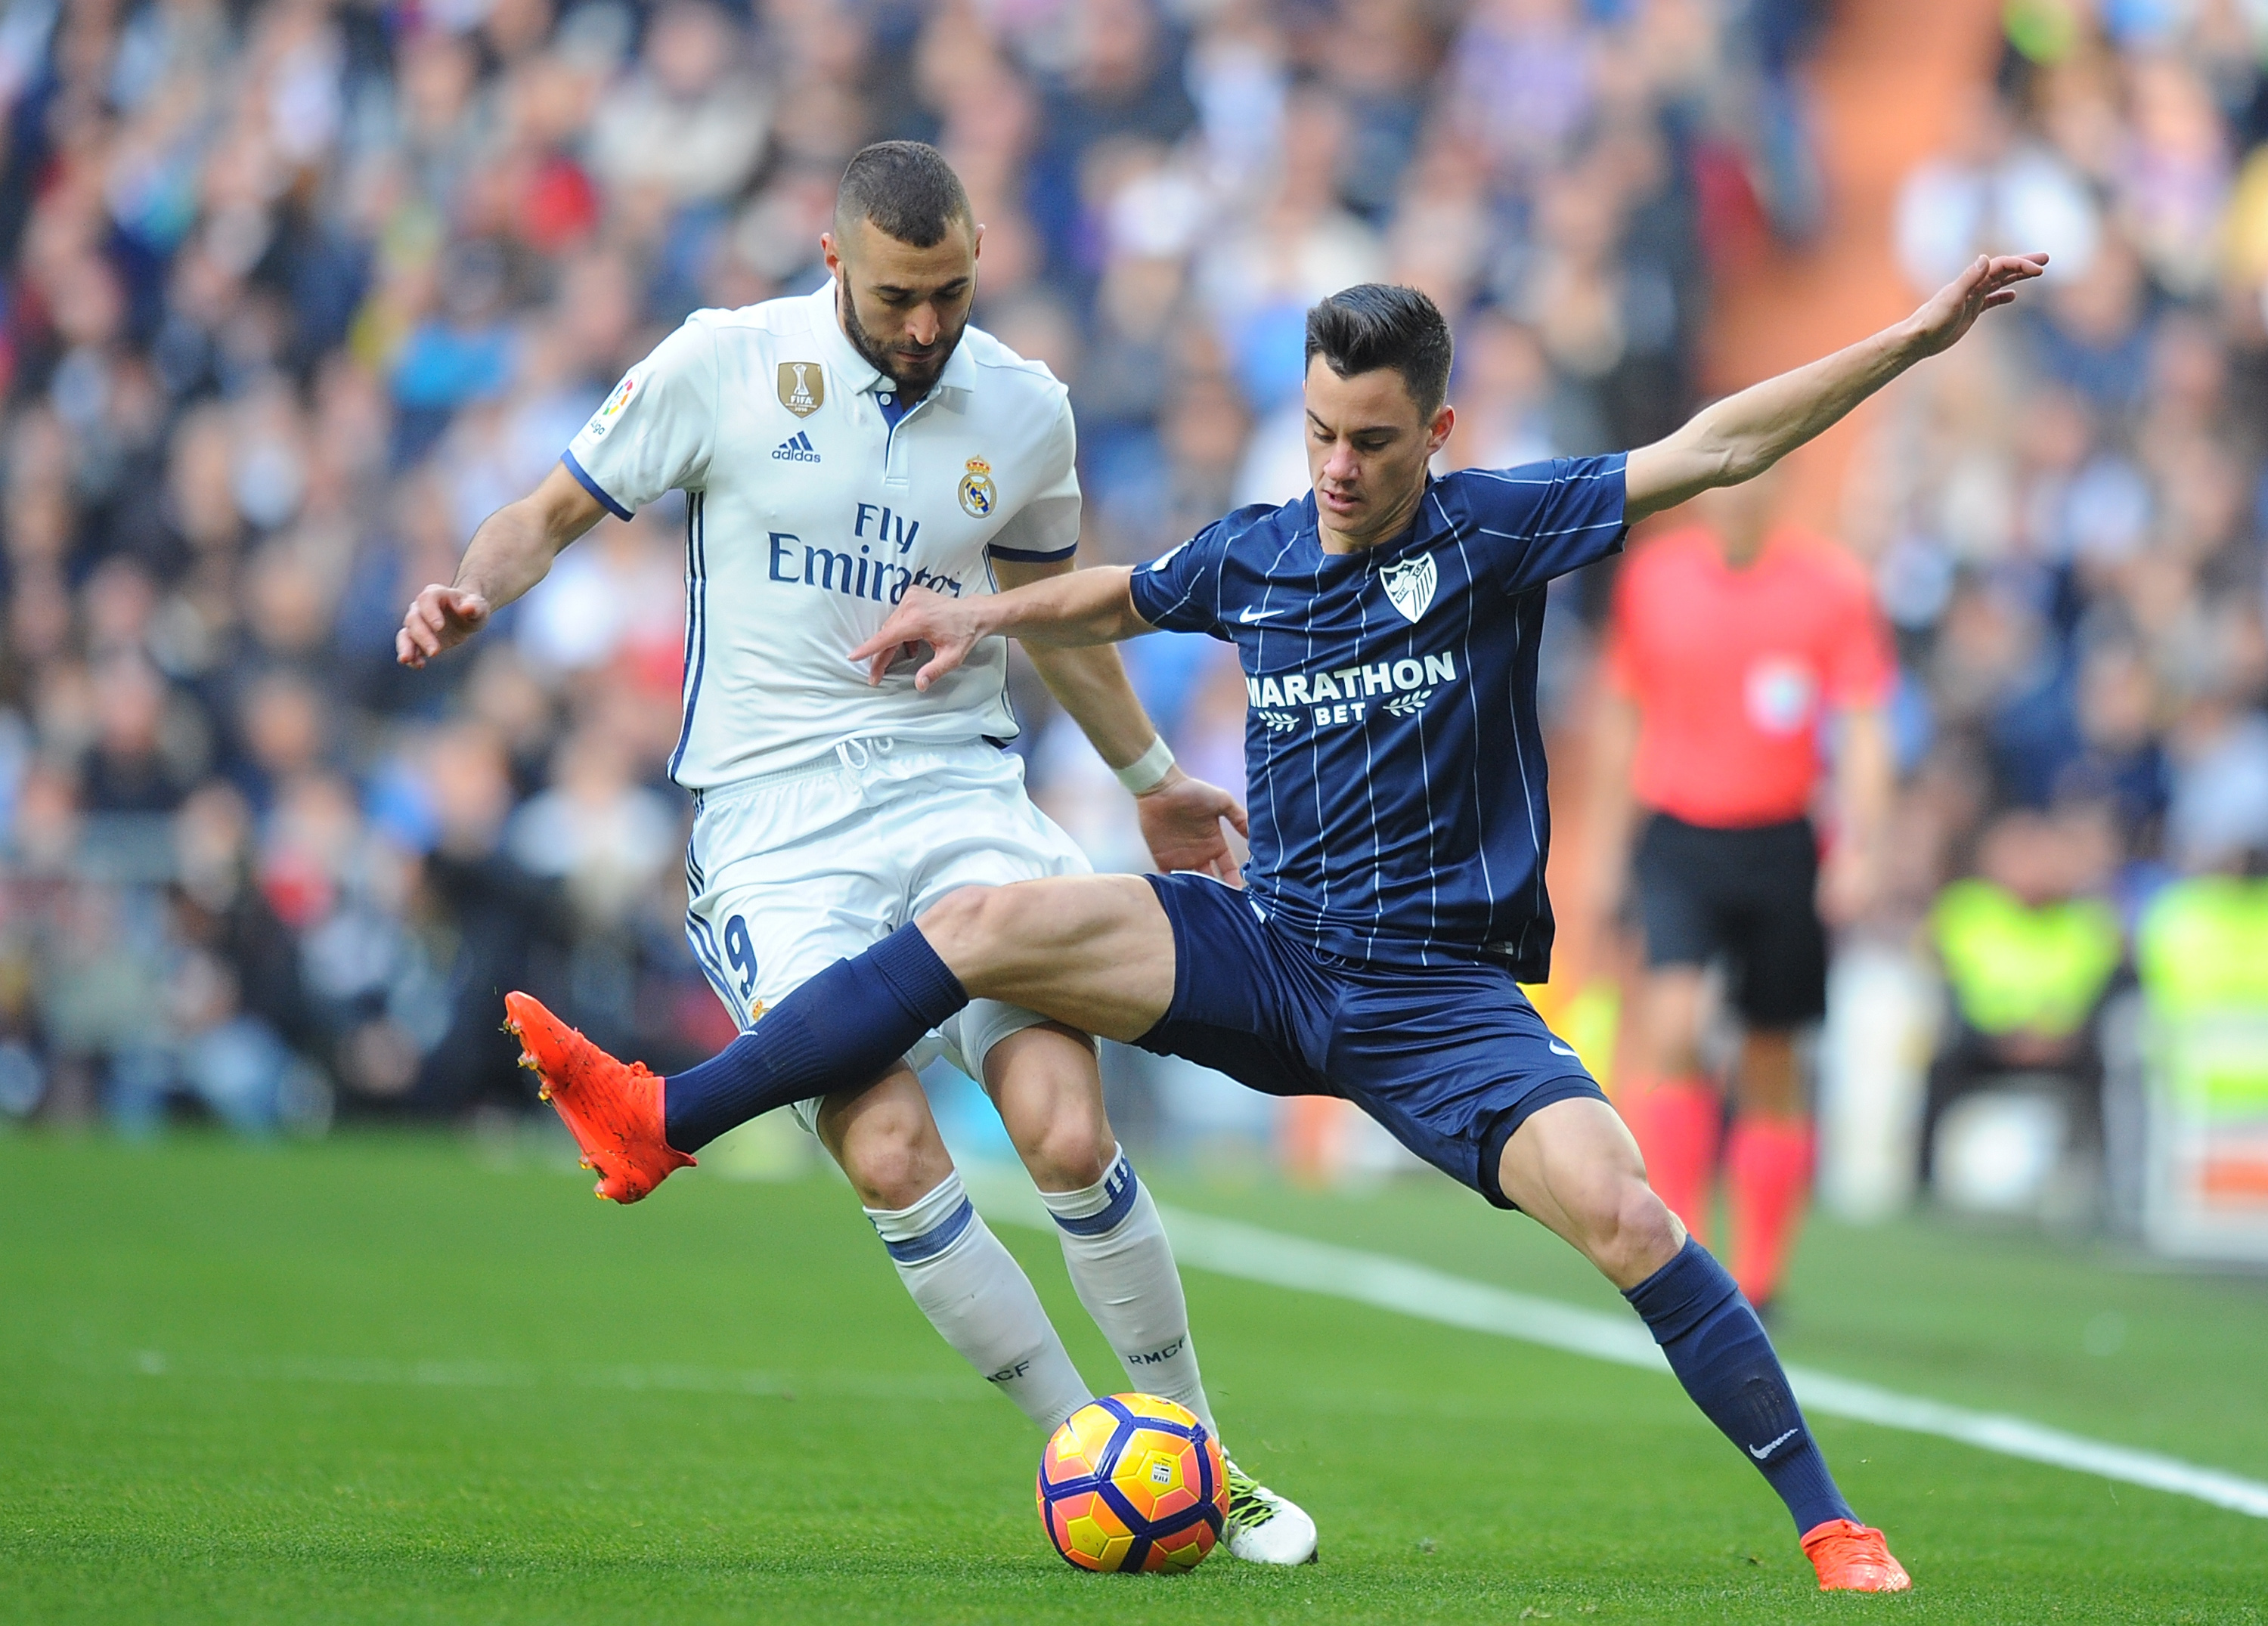 MADRID, SPAIN - JANUARY 21:  Karim Benzema of Real Madrid in action against  Juan Pablo Anor ÔÕJuanpiÕÕ of Malaga CF during the La Liga match between Real Madrid CF and Malaga CF at the Bernabeu on January 21, 2017 in Madrid, Spain.  (Photo by Denis Doyle/Getty Images)